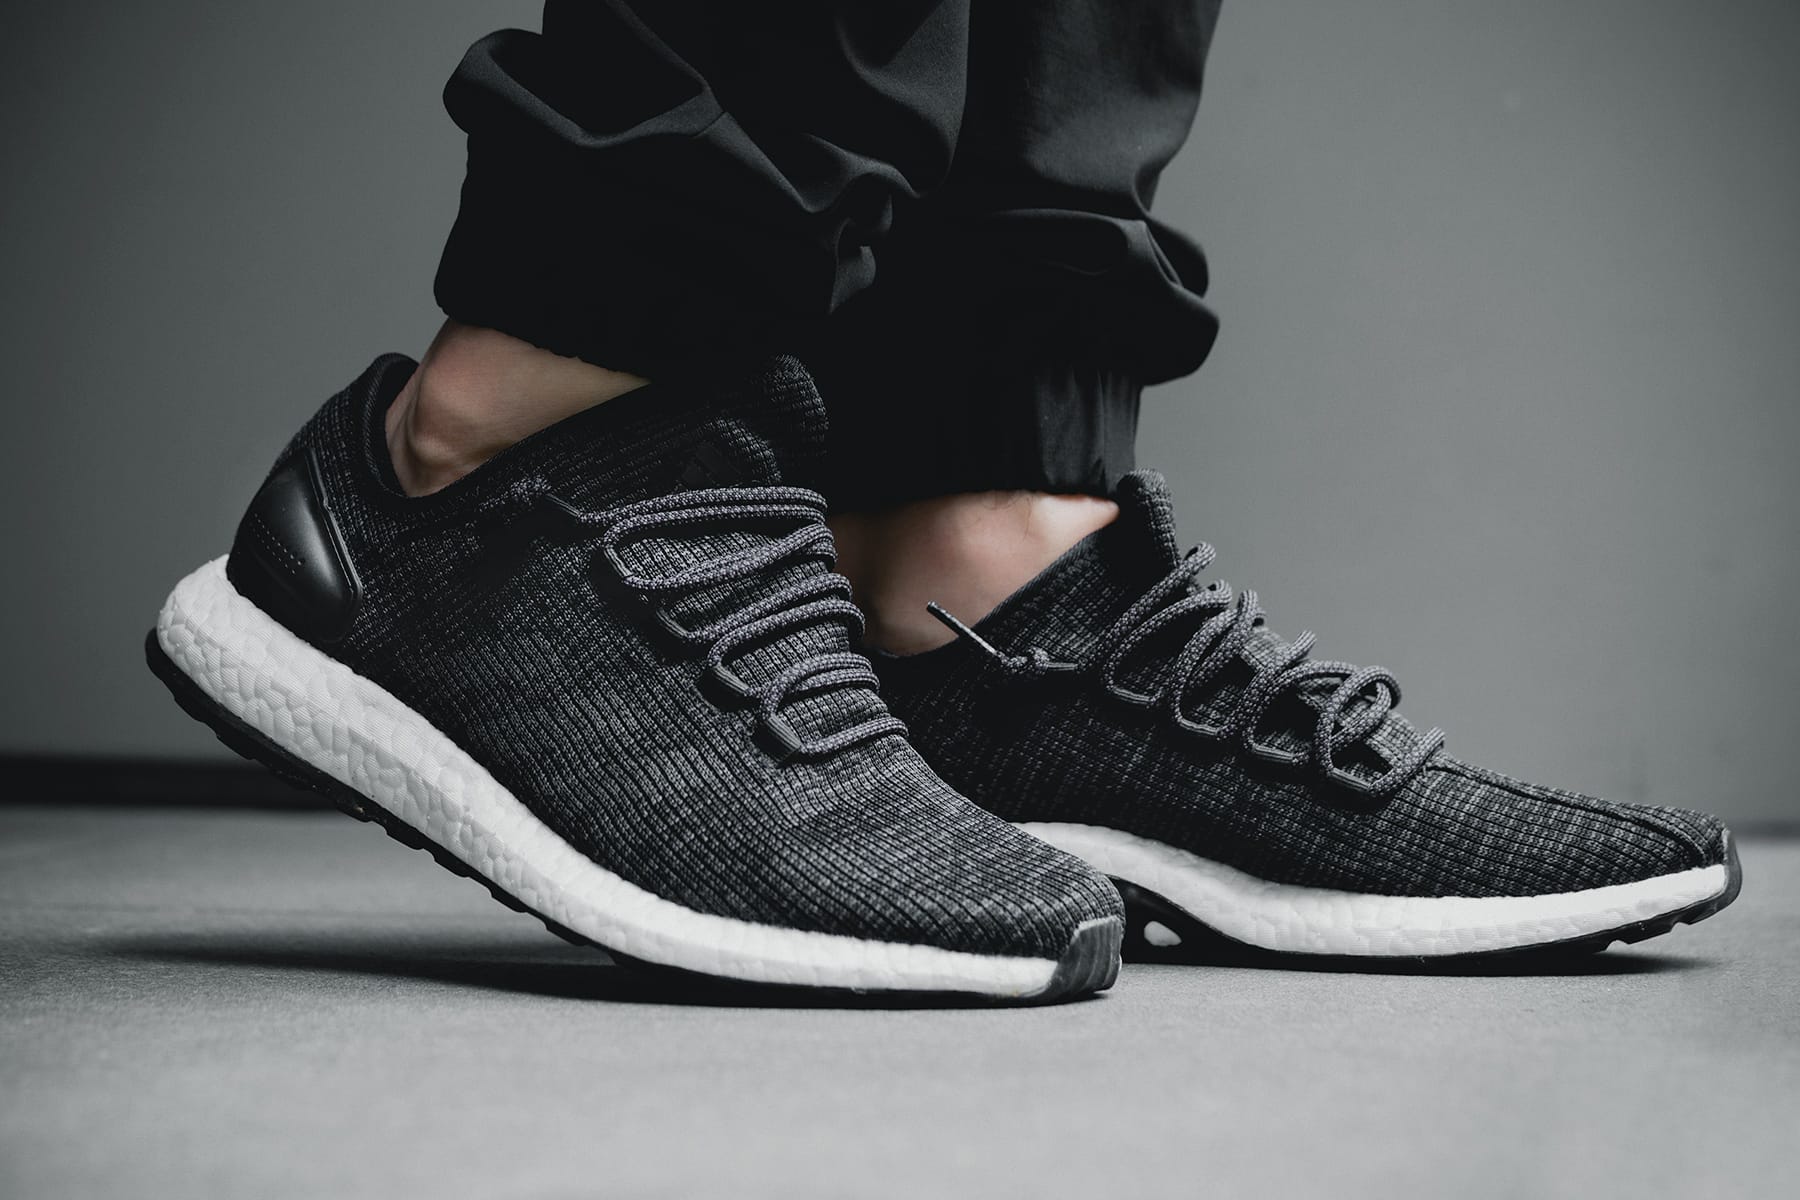 pureboost clima shoes off 55% - www 